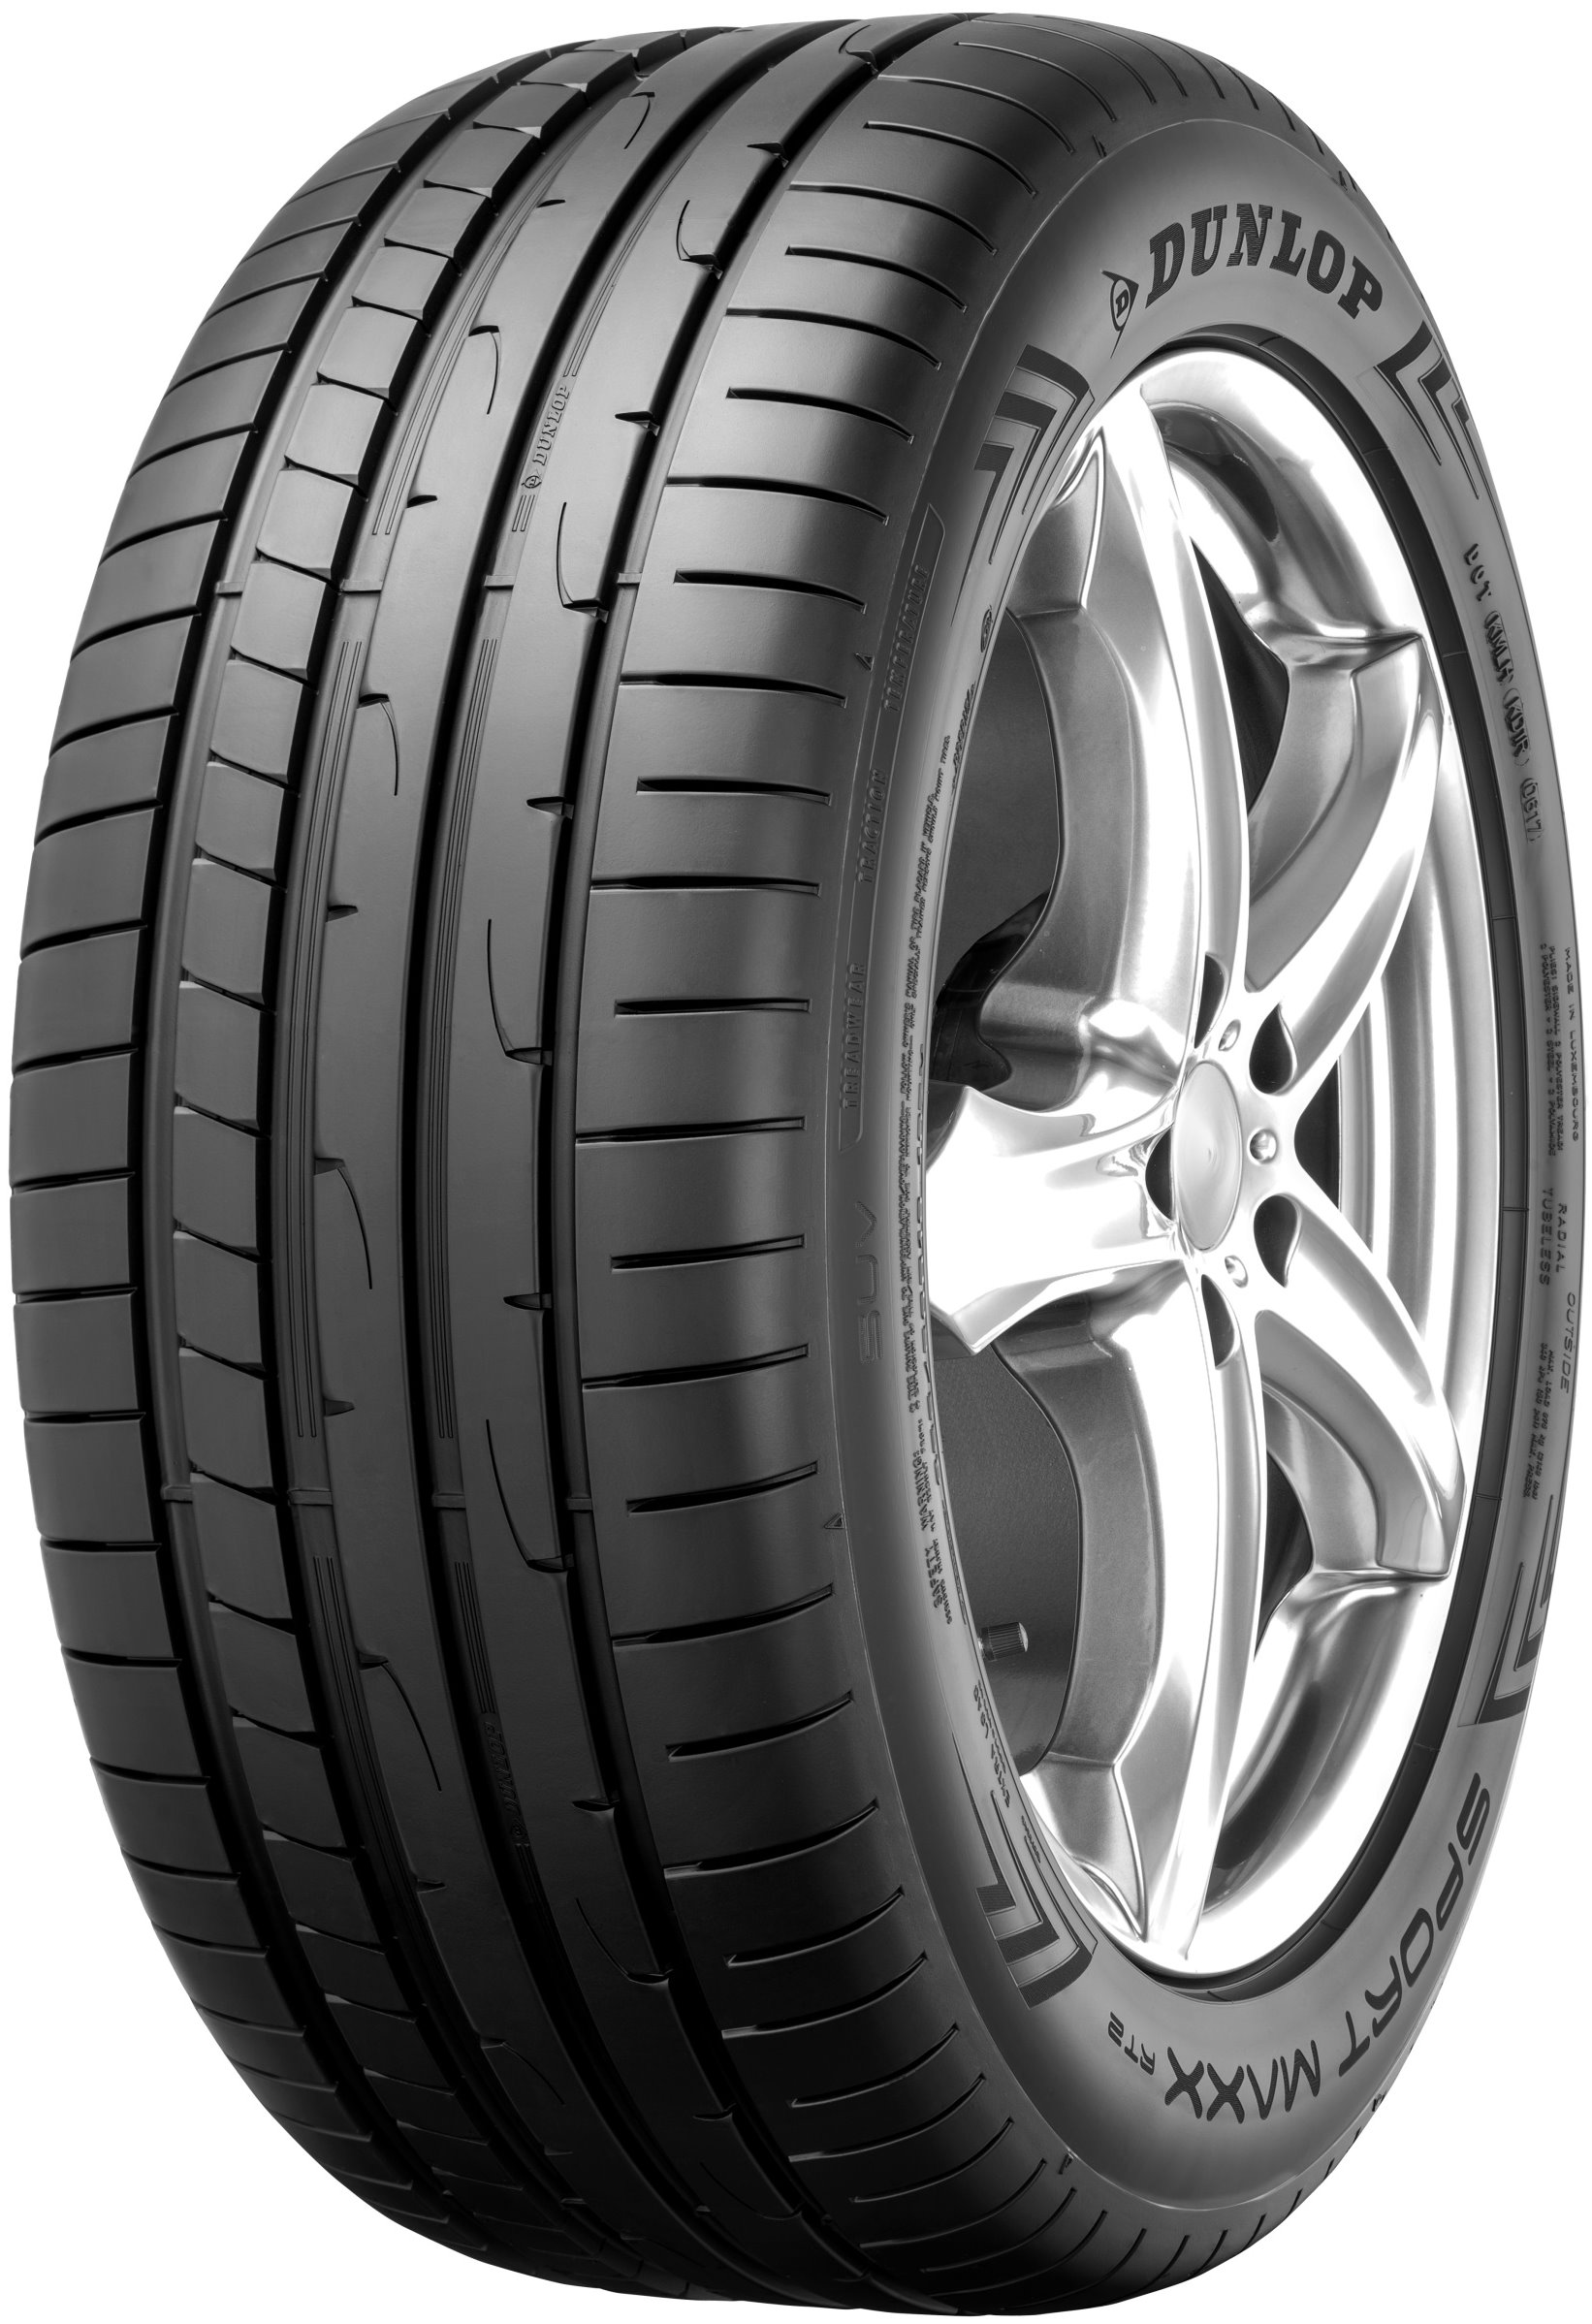 - Dunlop 2 Tire Tests RT and Reviews SportMaxx